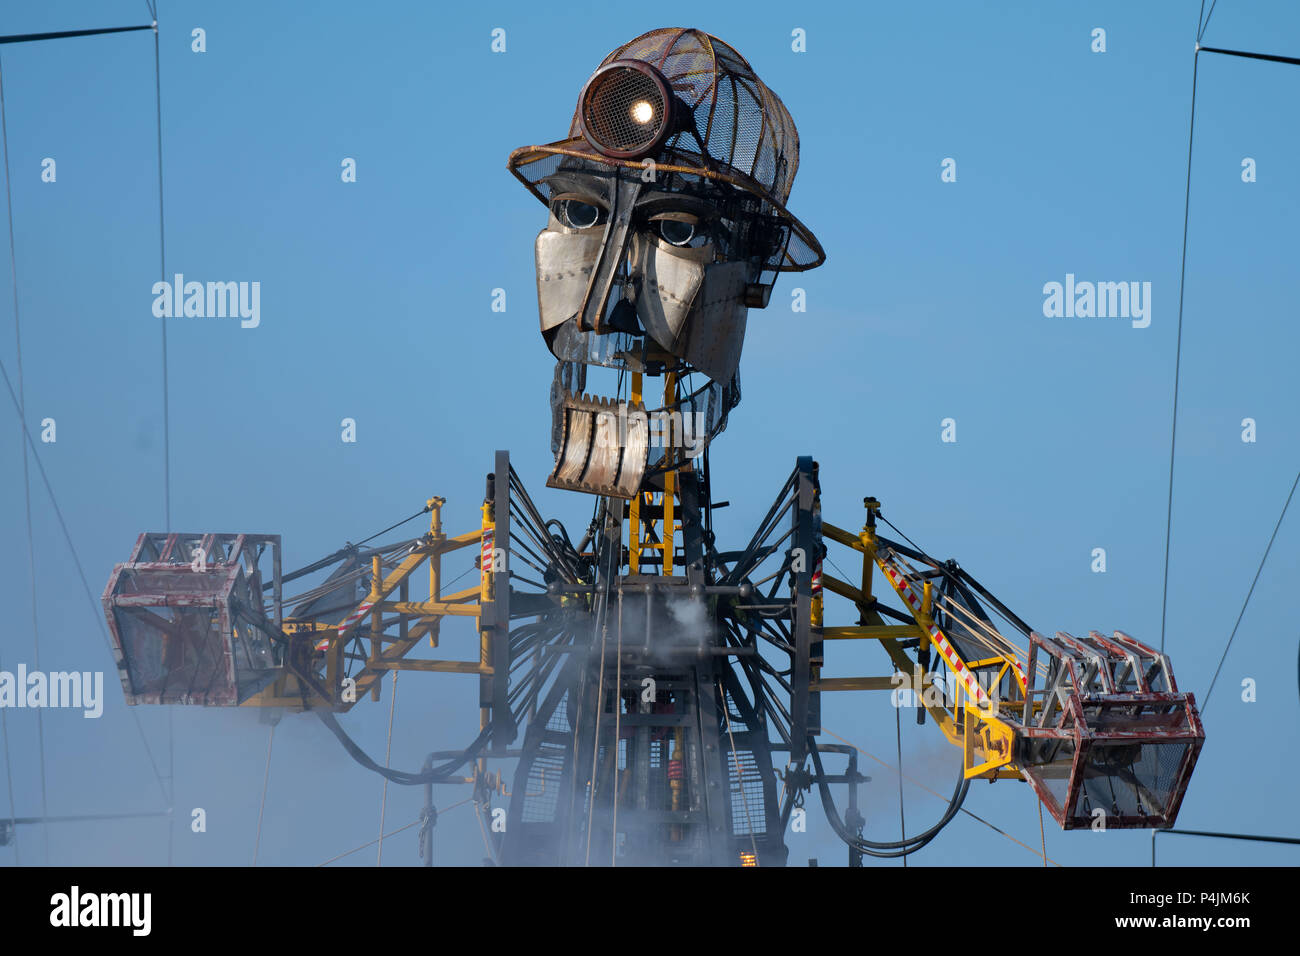 The Man Engine seen during the Volvo Ocean Race 2018 in Cardiff, Wales, UK. Man Engine, which resembles a giant miner, was launched in 2016 to celebra Stock Photo